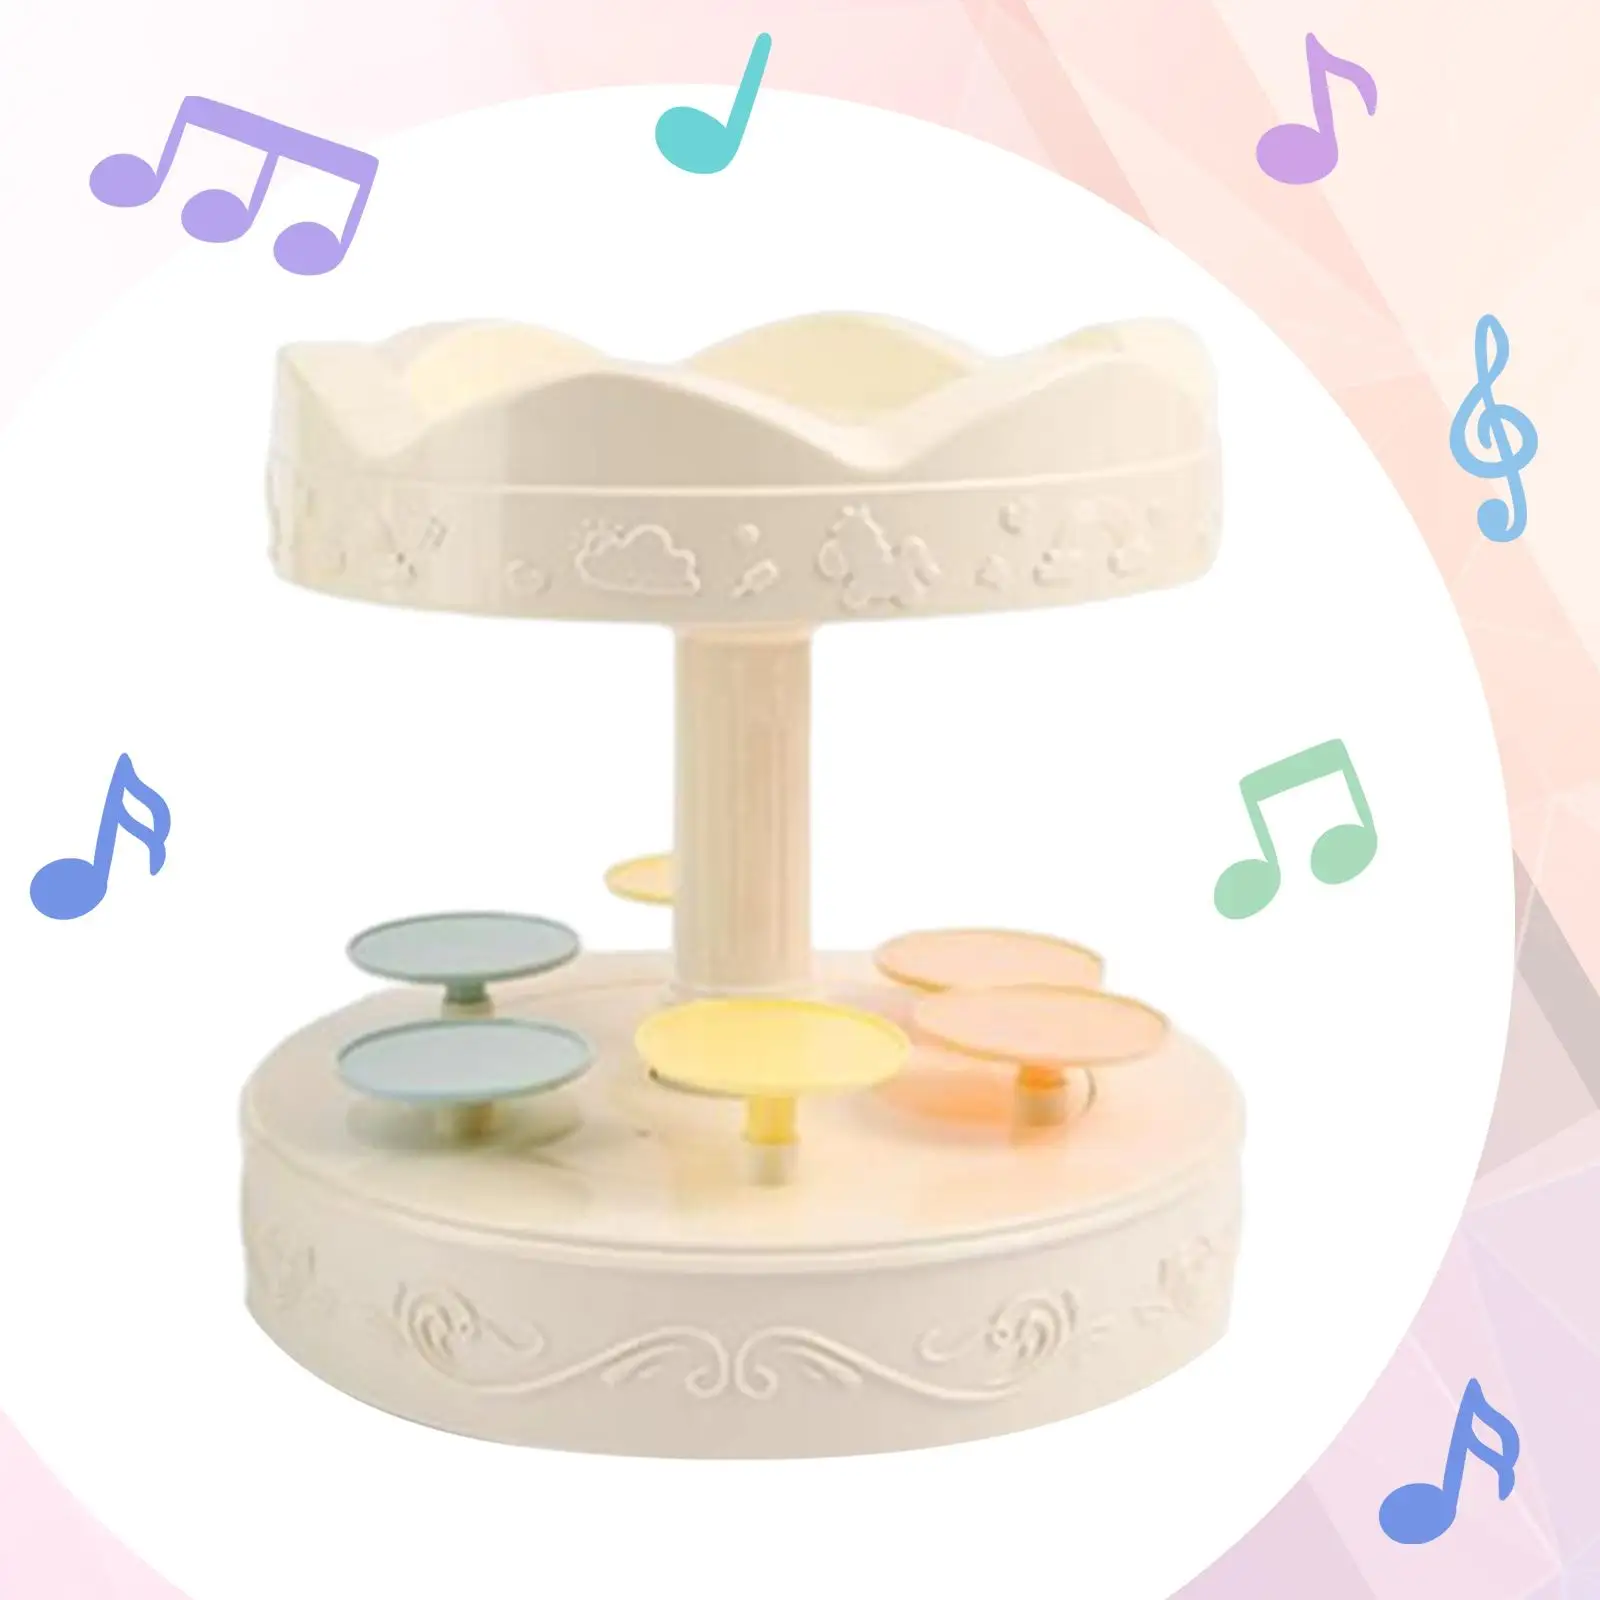 Carousel Cupcake Holder Cookie Cupcake Holder Automatic Rotating Turntable